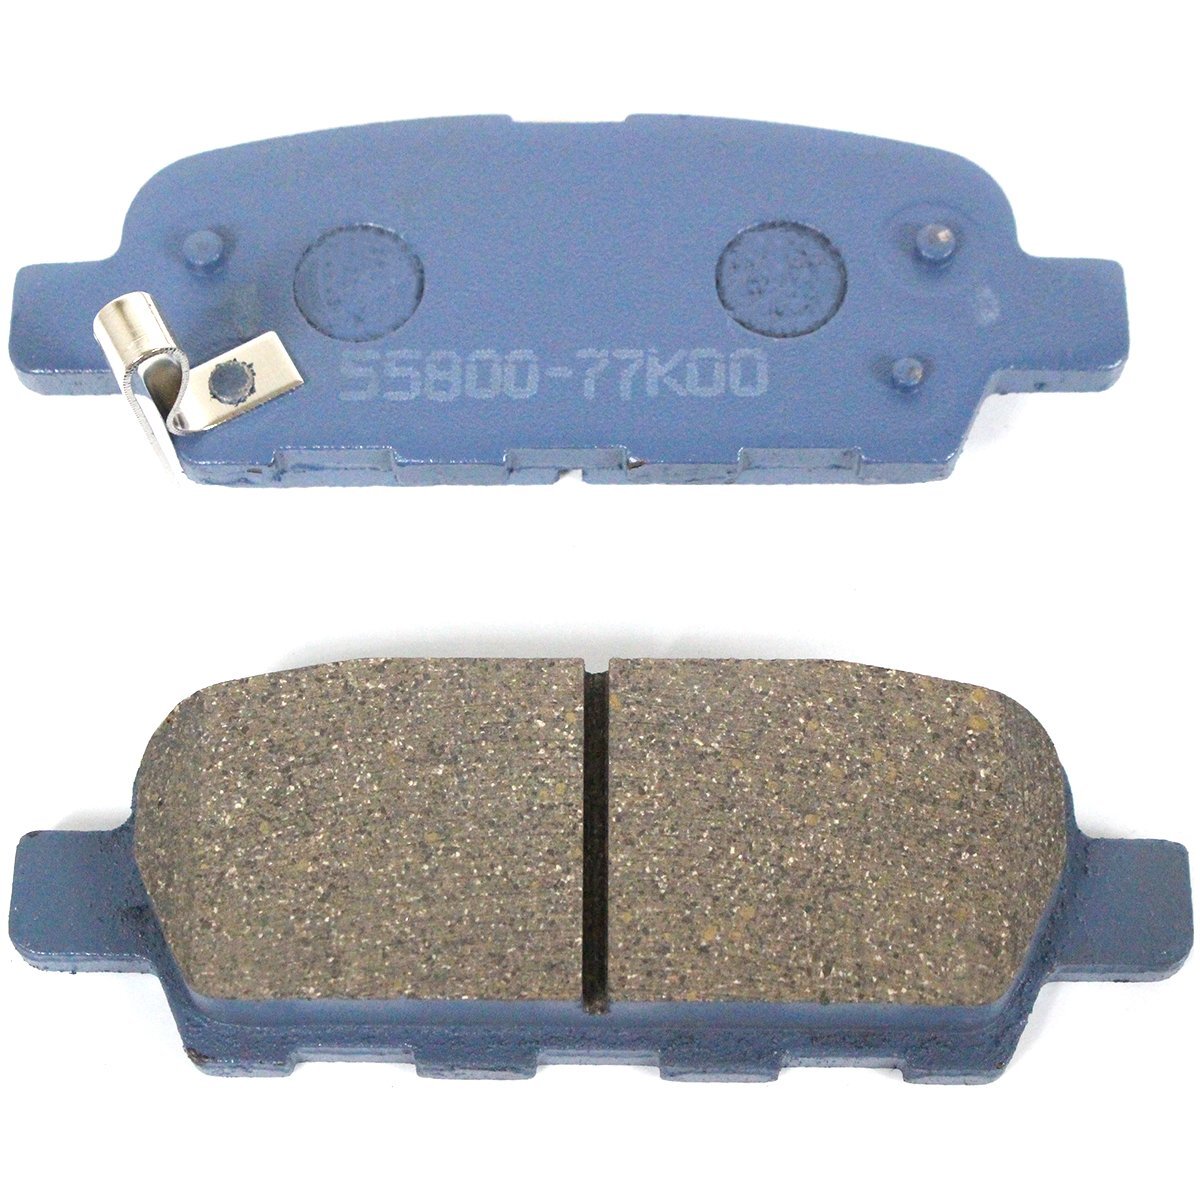 [ new goods immediate payment ] Fuga Y51 HY51 KY51 KNY51 4WD rear brake pad left right 4 pieces set NAO material 55800-77K00 44060-8H385 disk pad 